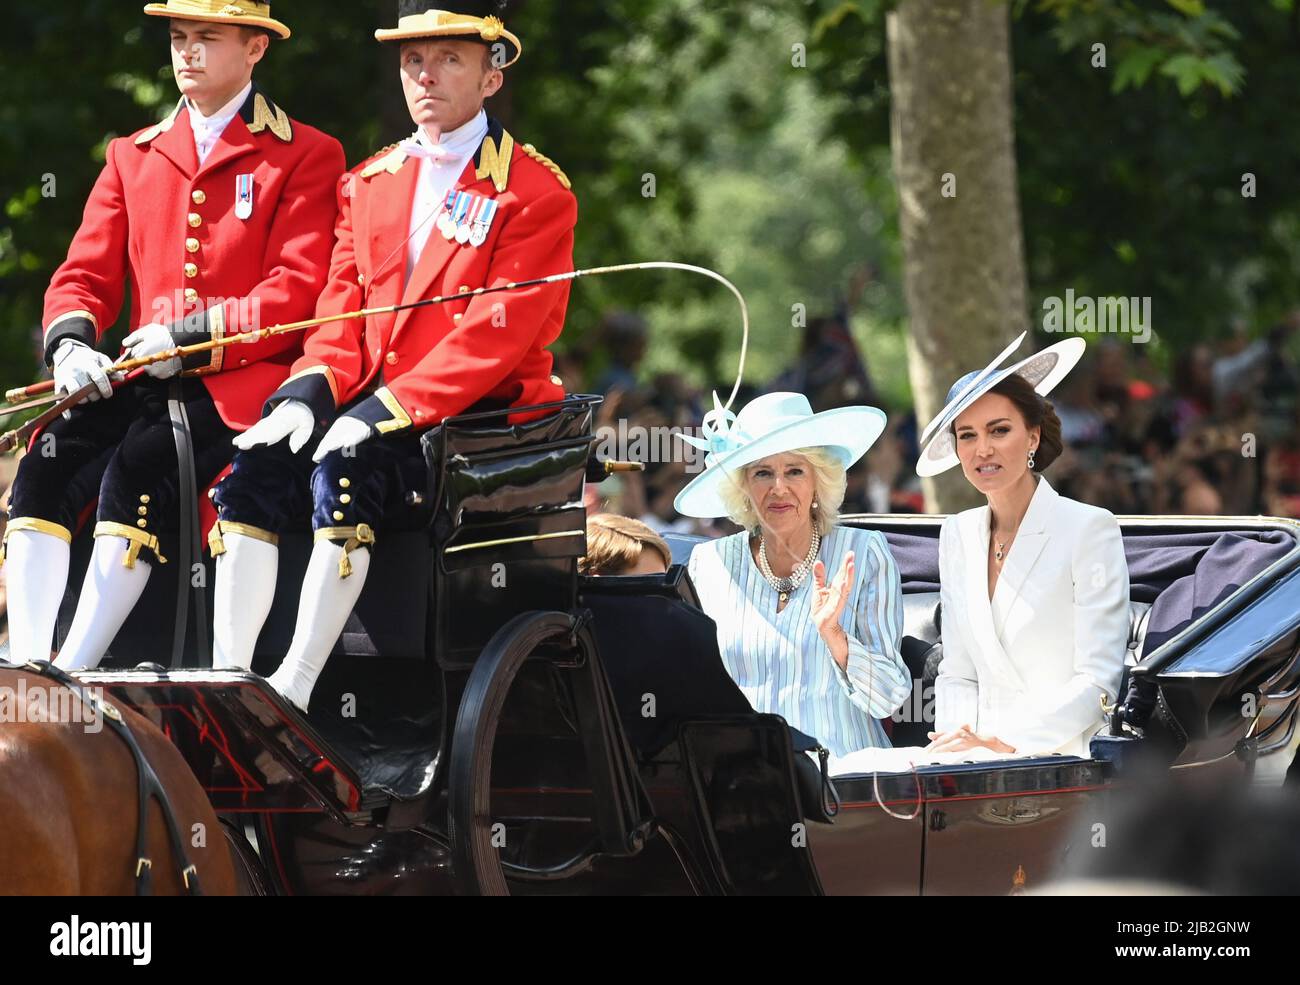 June 2nd, 2022. London, UK. The Duchess of Cambridge and The Duchess of Cornwall riding in a carriage during Trooping the Colour, part of the Platinum Jubilee celebrations. Credit: Doug Peters/EMPICS/Alamy Live News Stock Photo